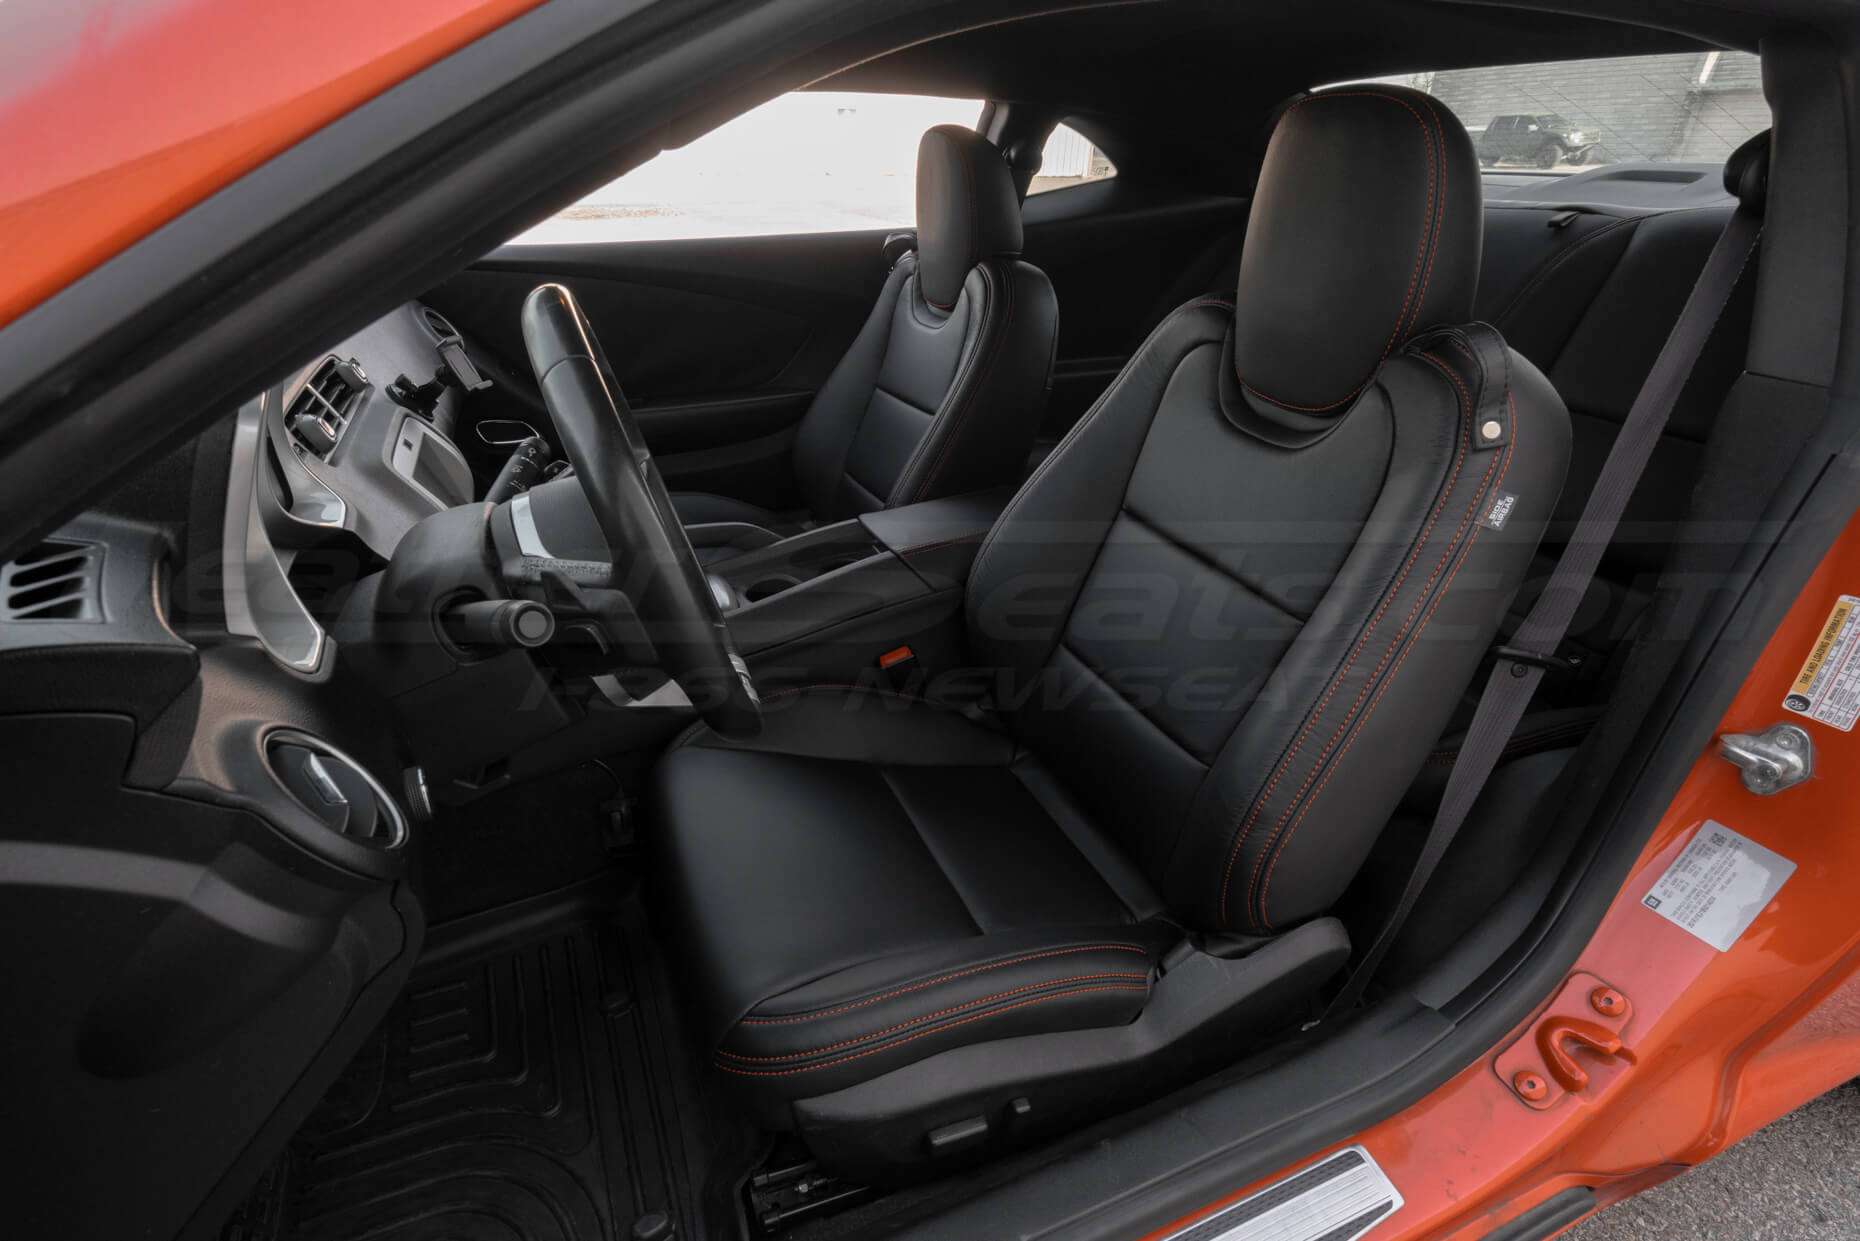 Chevrolet Camaro Installed Leather Seats - Black - Front driver's seat